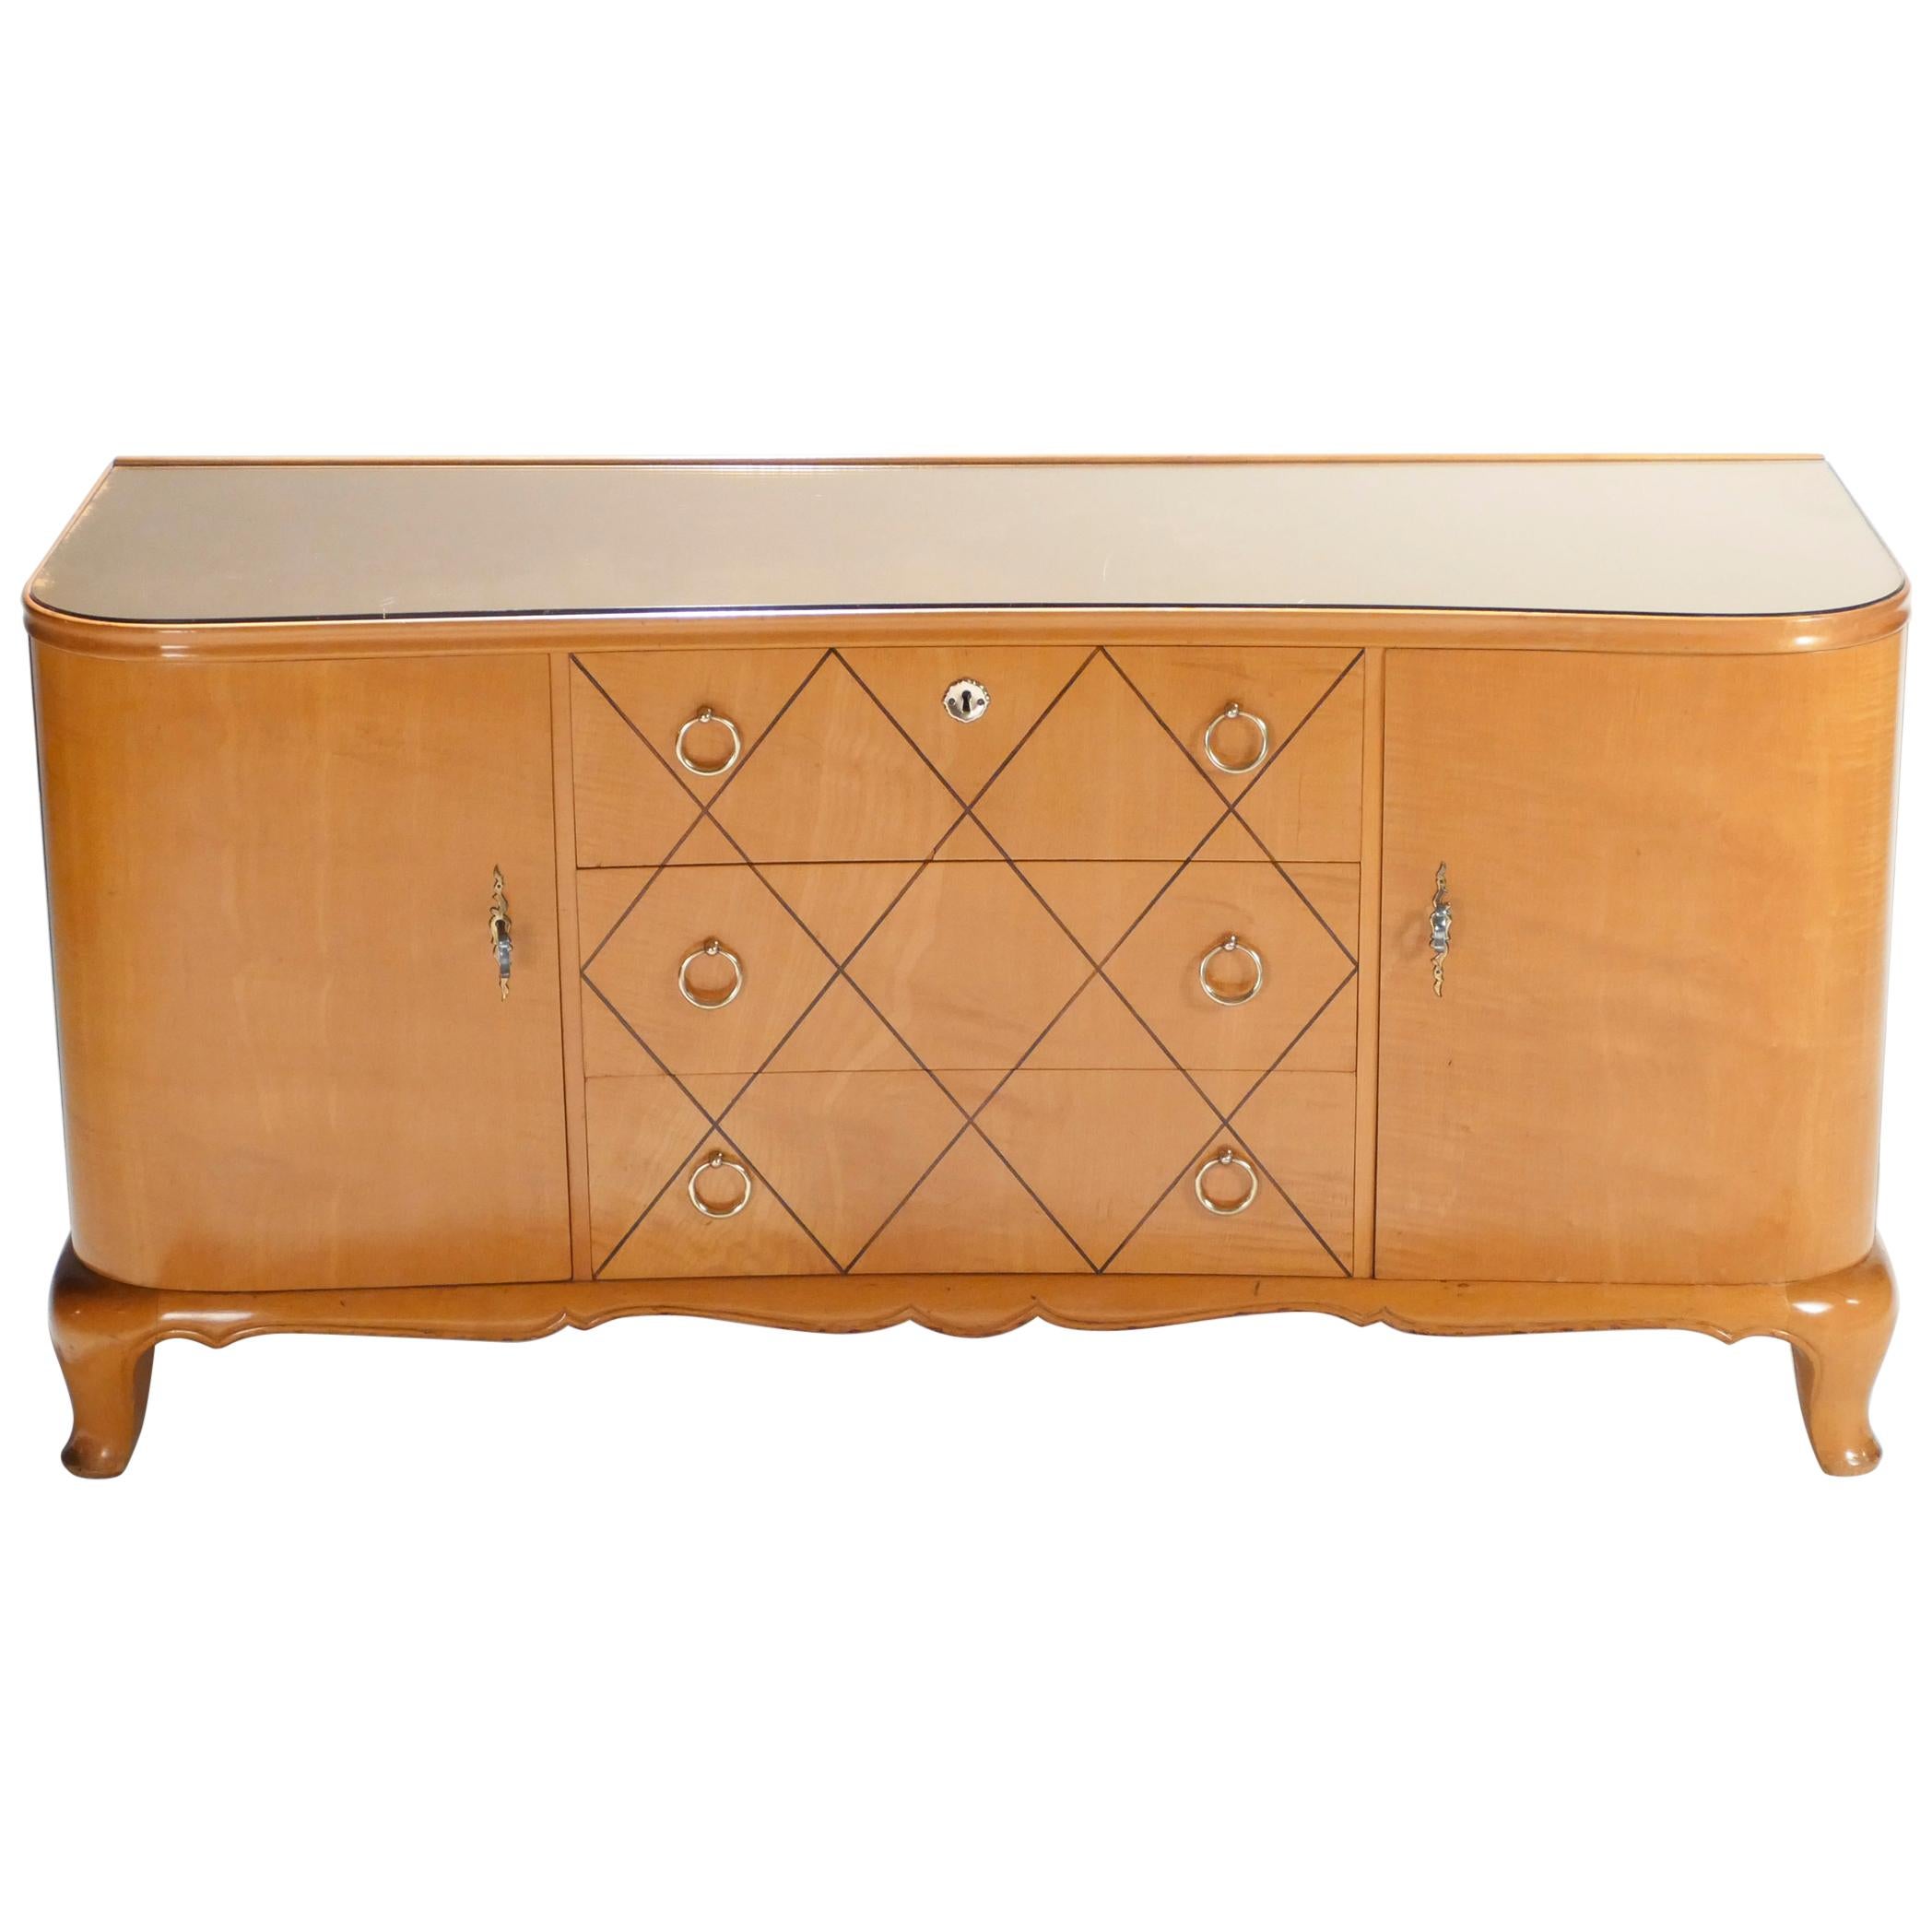 Mid-Century Modern French René Prou Sycamore Mirrored Brass Sideboard Commode, 1950s